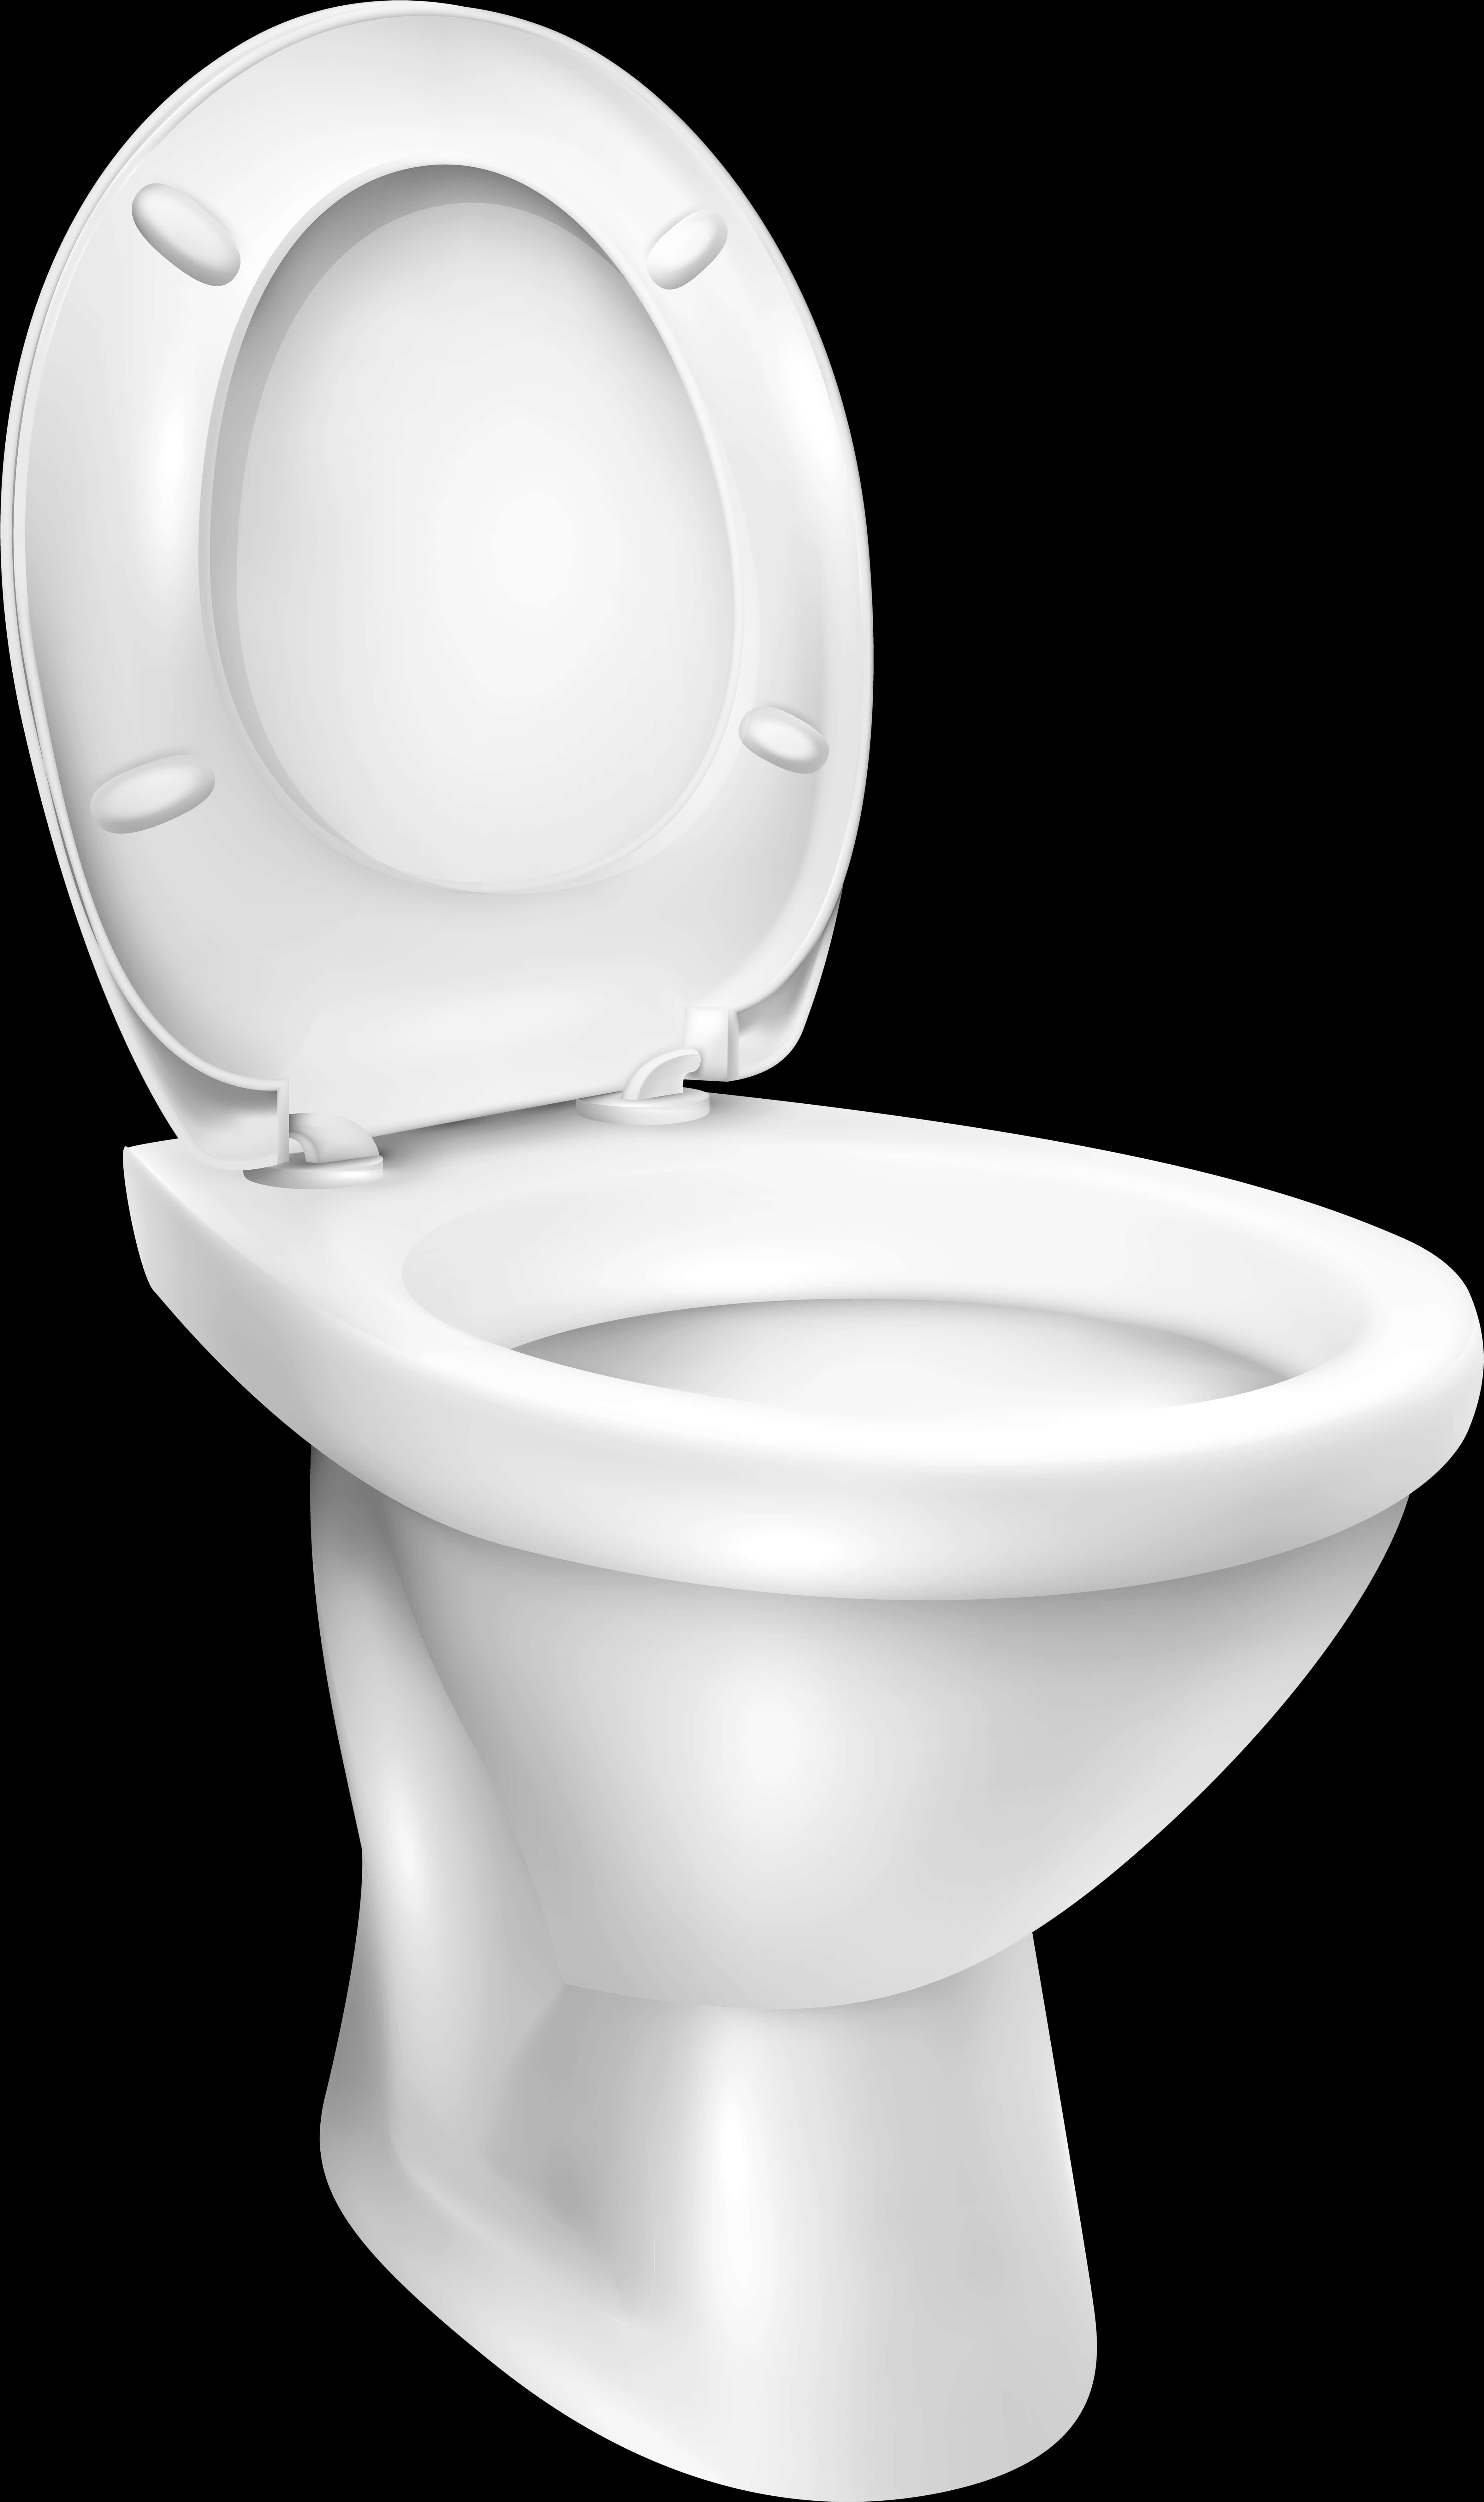 A White Toilet With The Seat Up